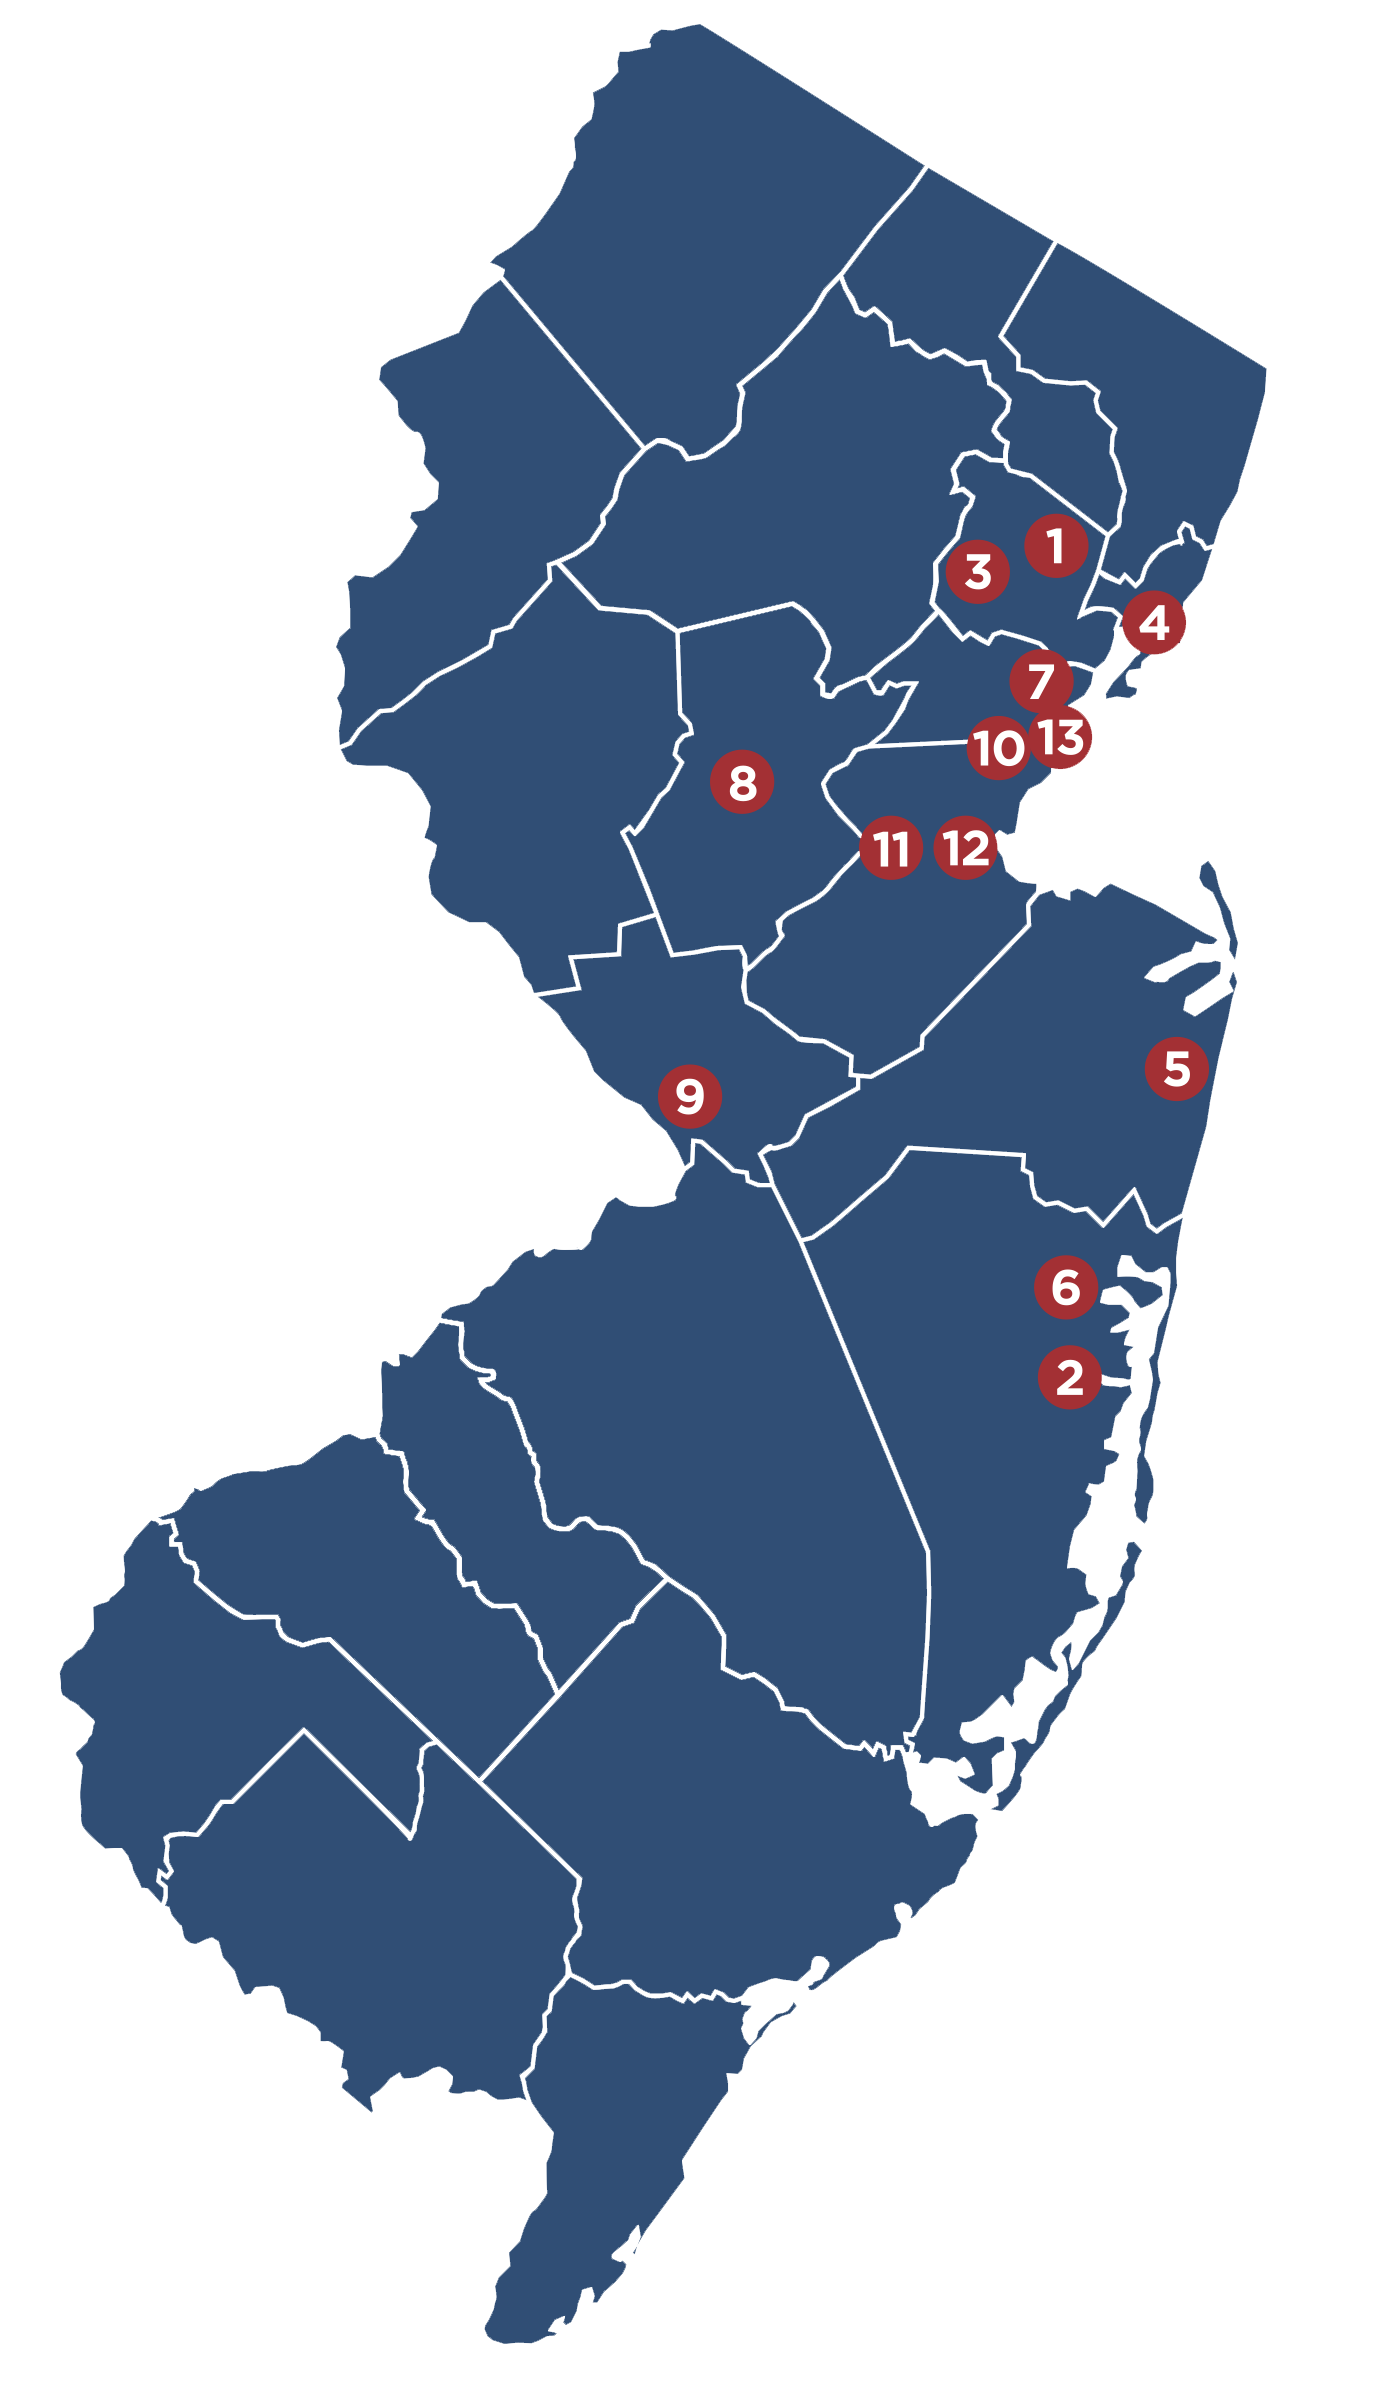 blue map of the state of New Jersey with 13 RWJBH hospital locations marked